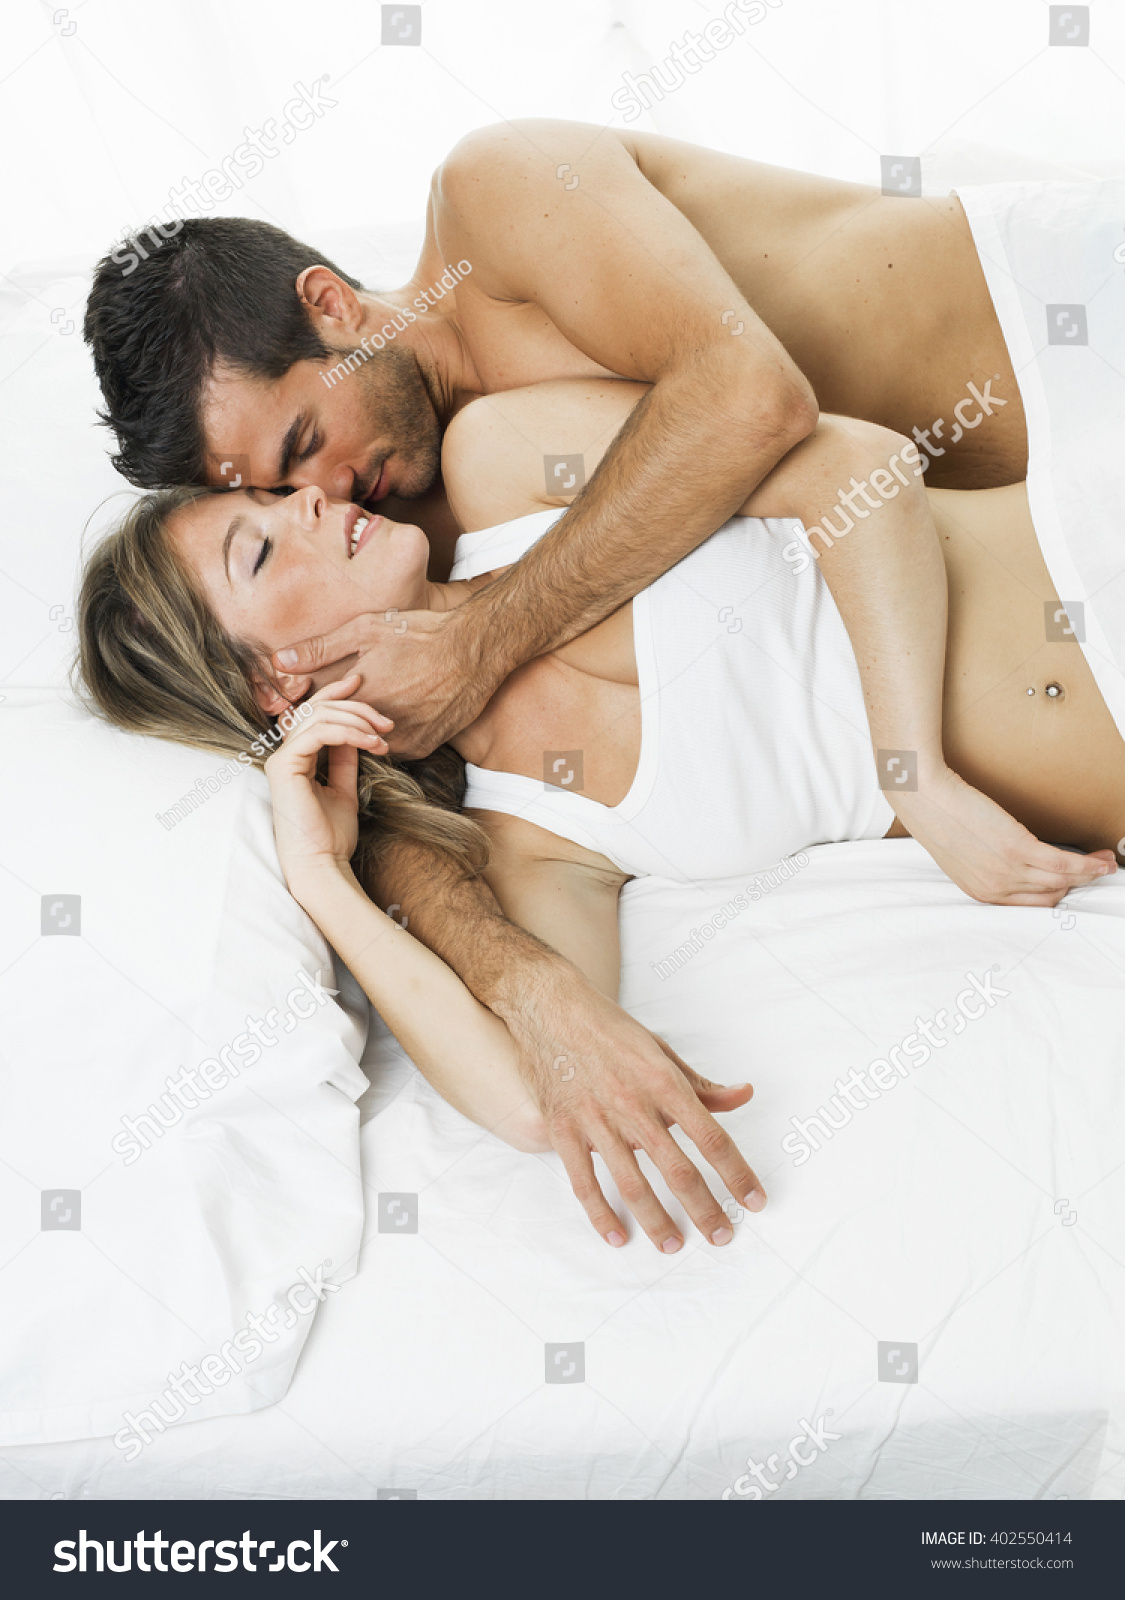 14 Ways To Spice Up Your Sex Life For More Pleasure In Bed